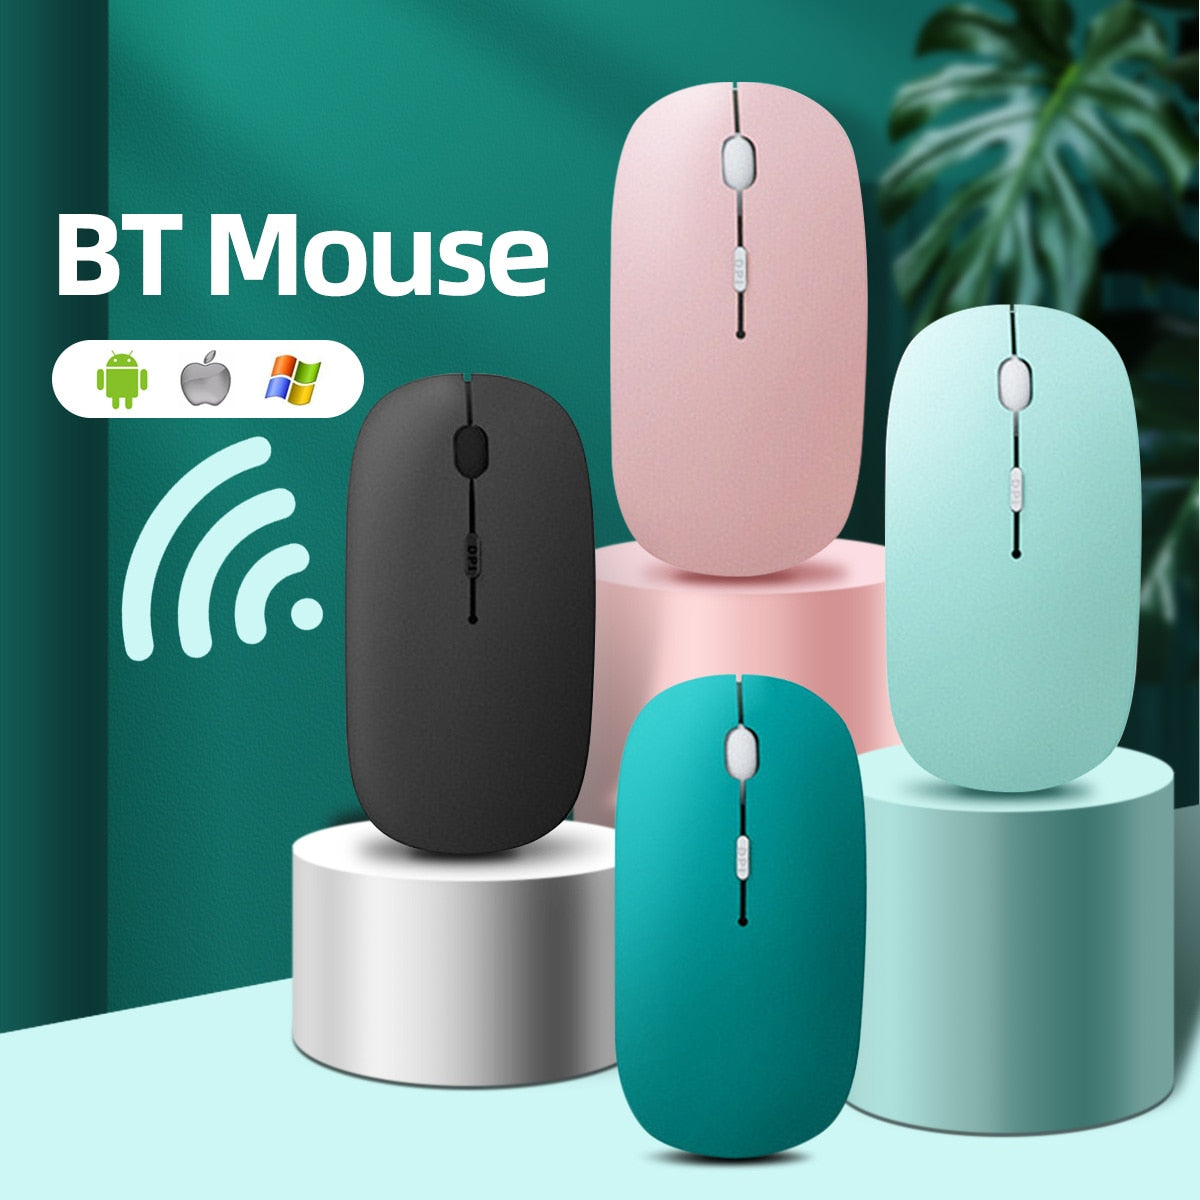 ANMONE Bluetooth Mouse For iPad Samsung Huawei Lenovo Android Windows Tablet Battery Wireless Mouse For Notebook Computer